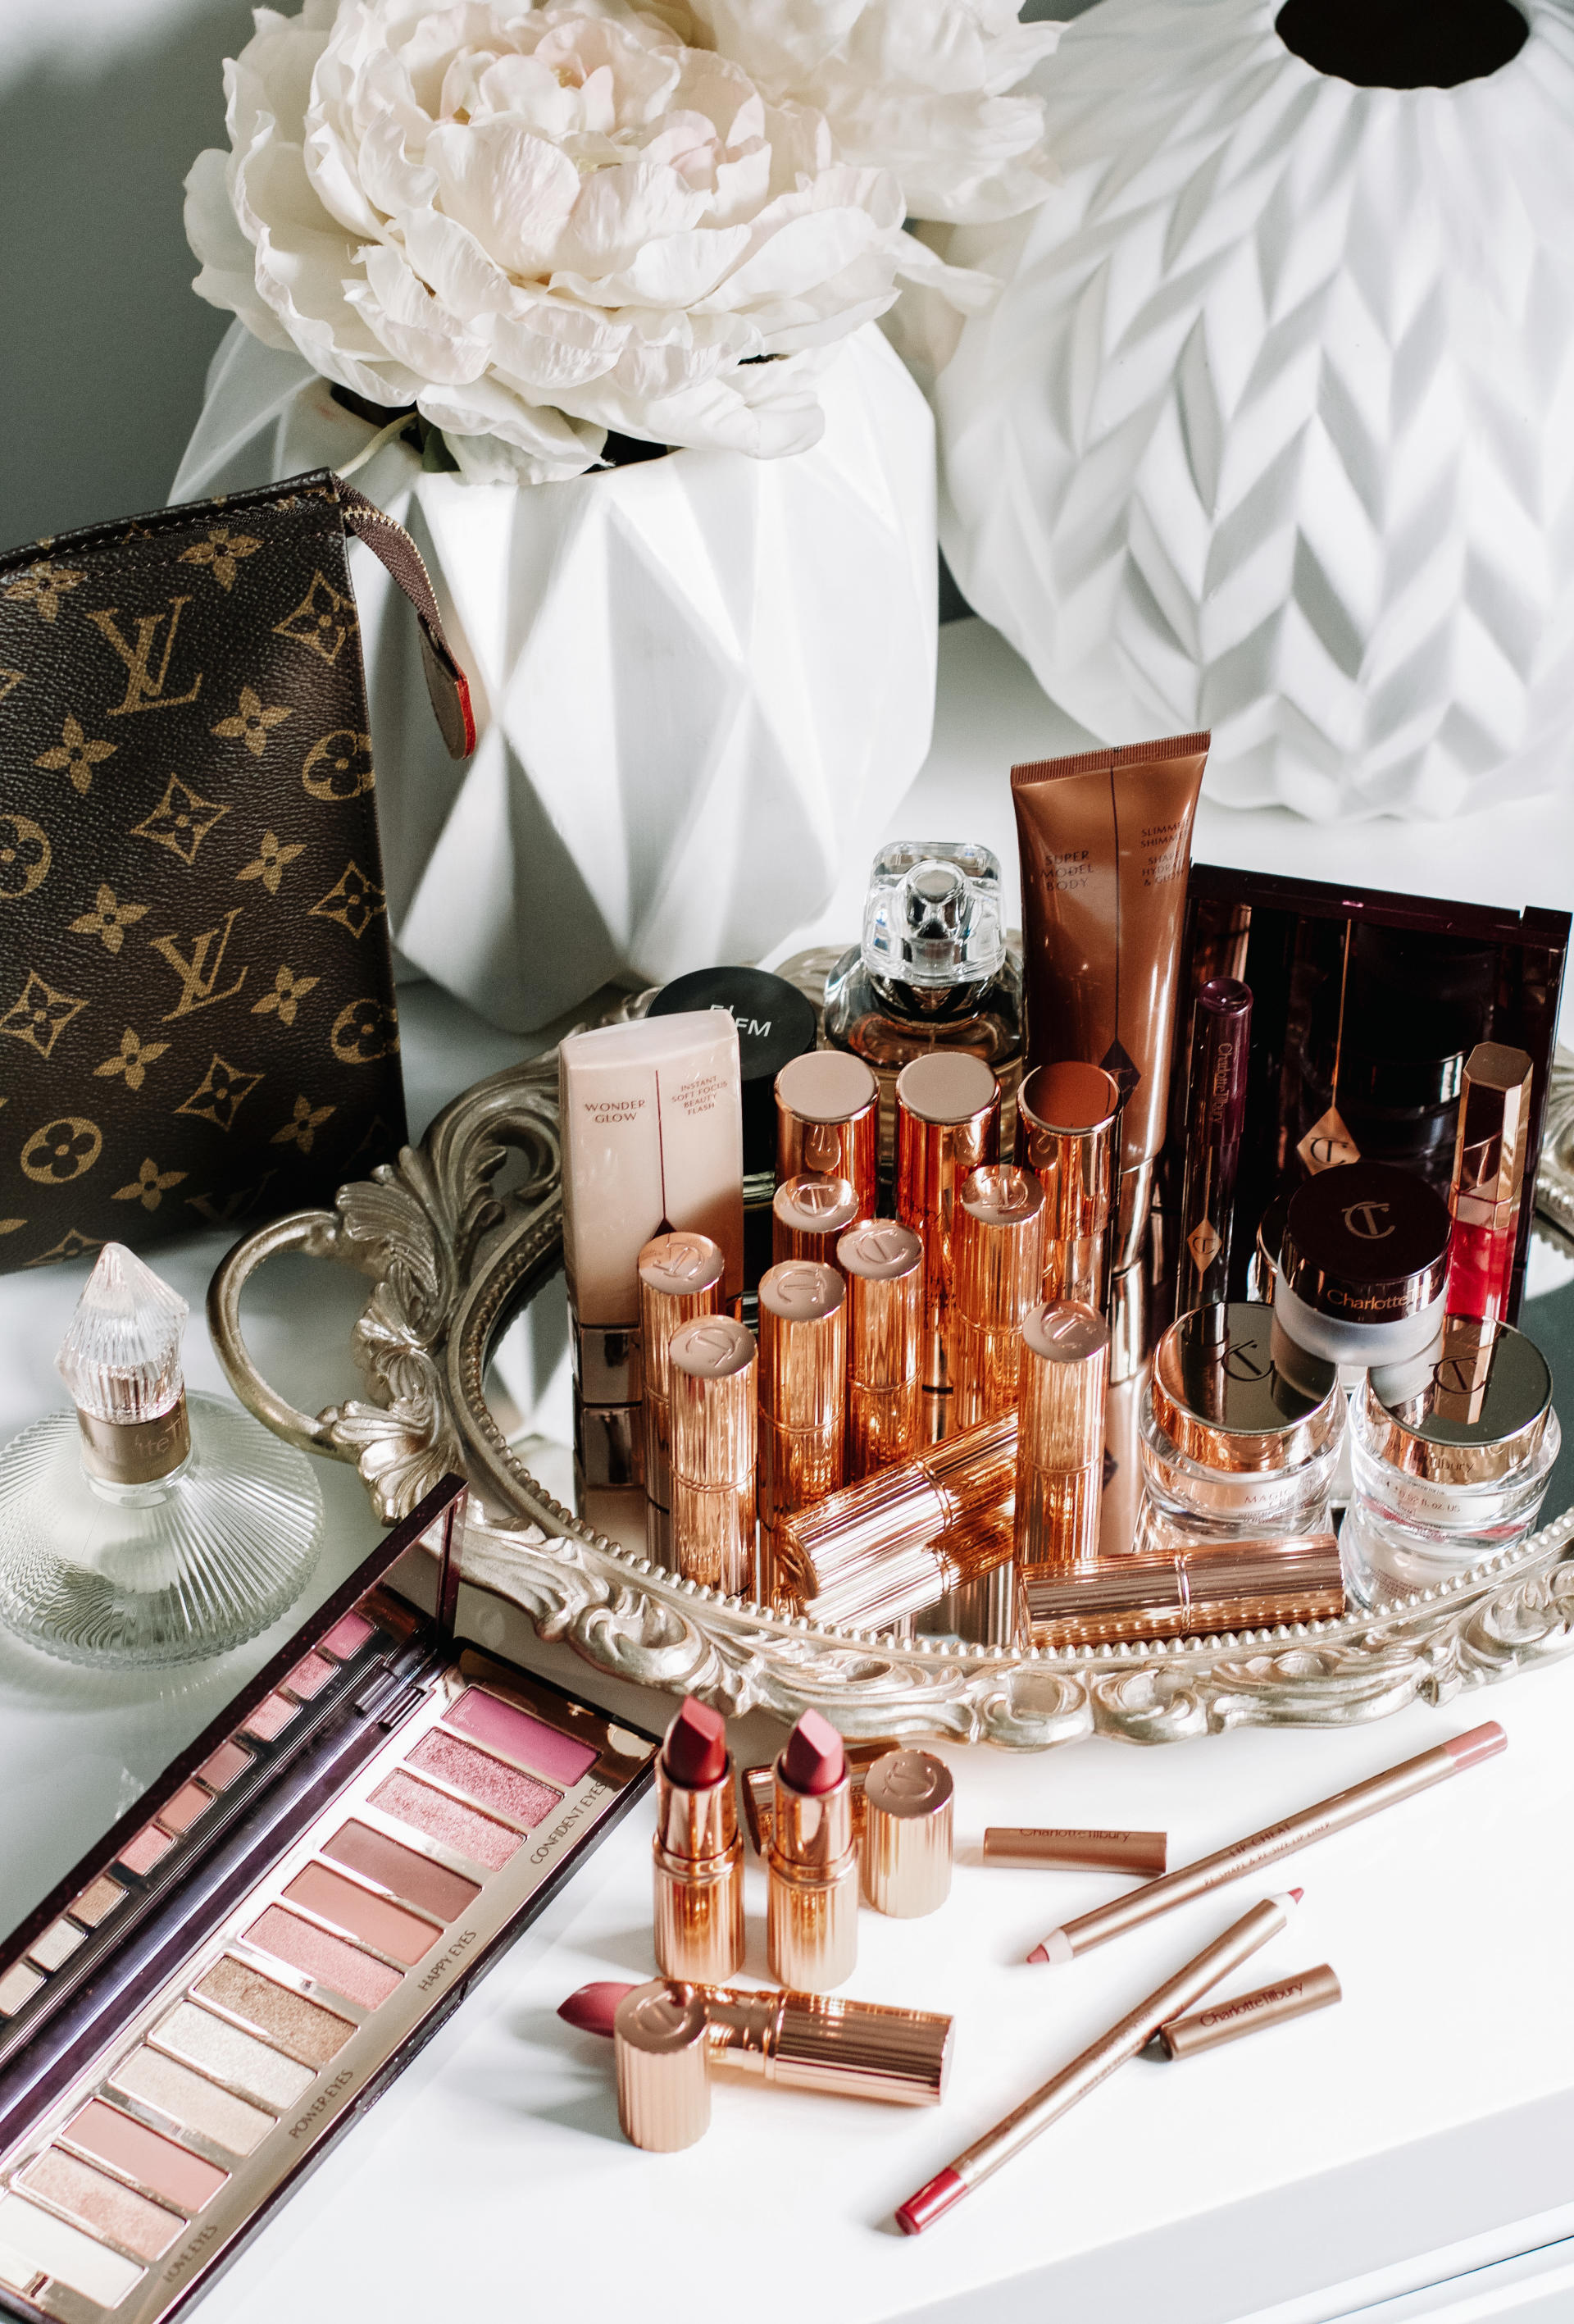 Charlotte Tilbury's Best Black Friday Beauty Deals | Style Domination by Dominique Baker